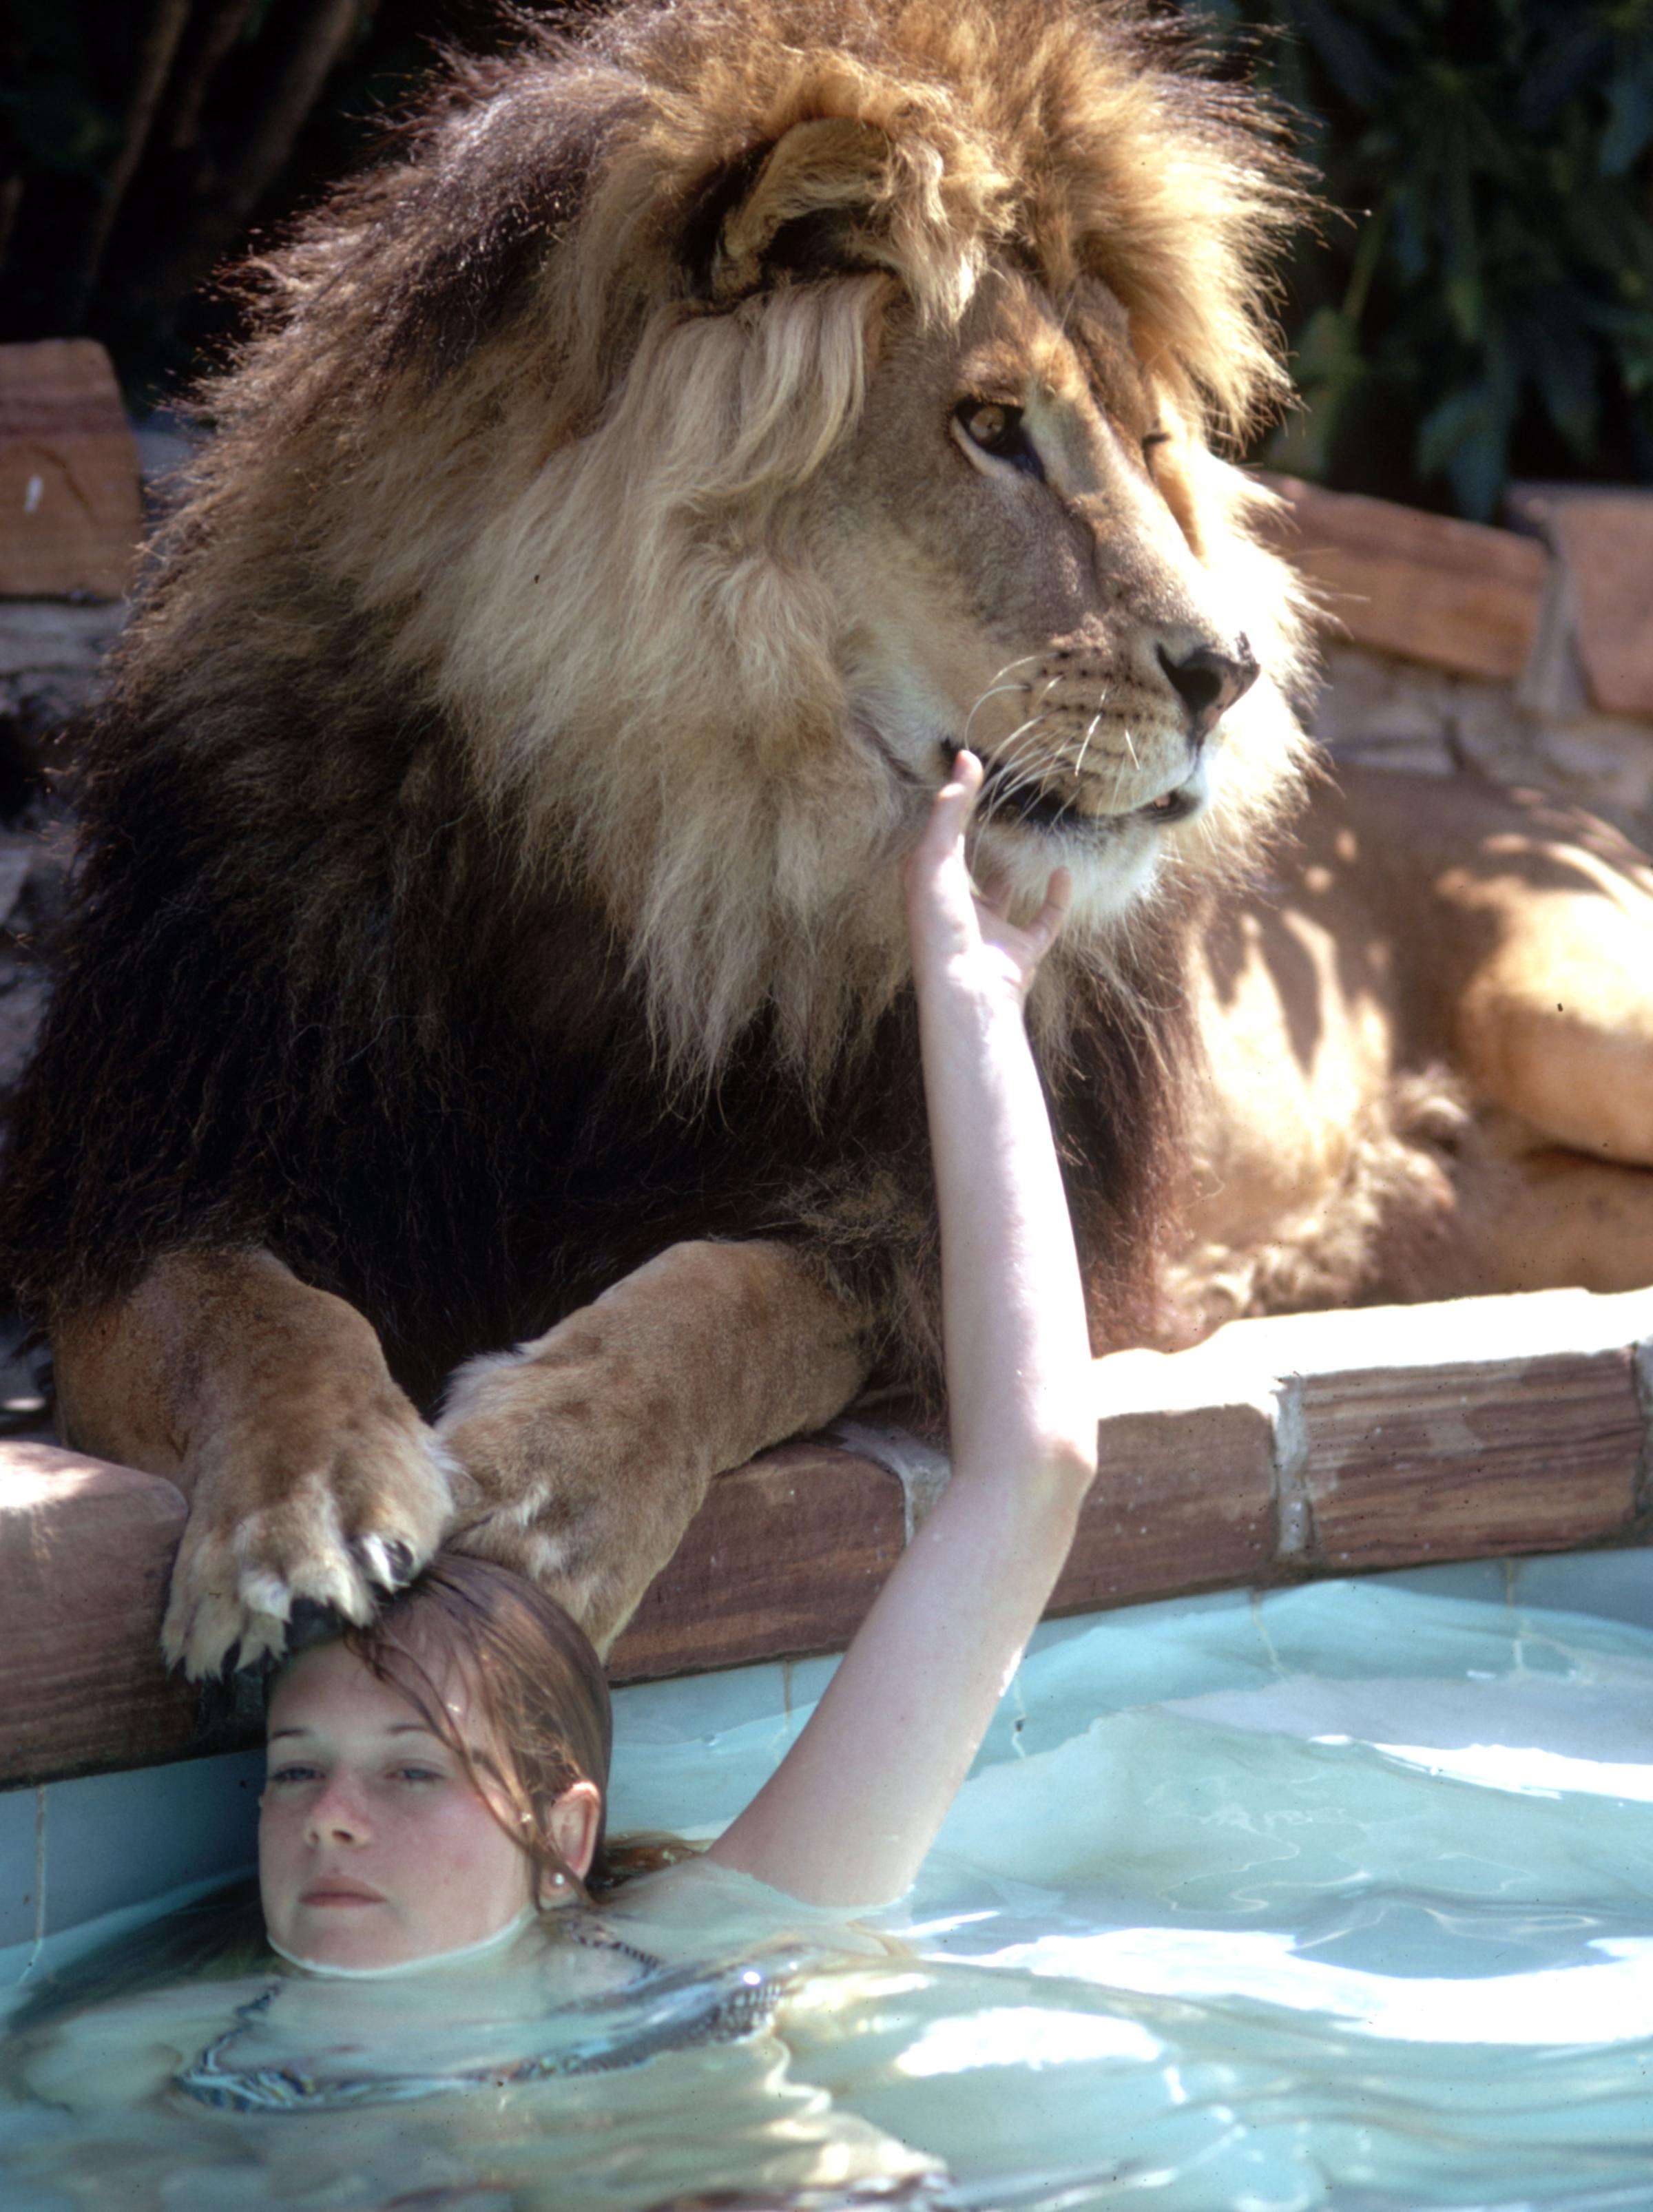 Tippi Hedren's daughter, Melanie Griffith, with Neil the lion.